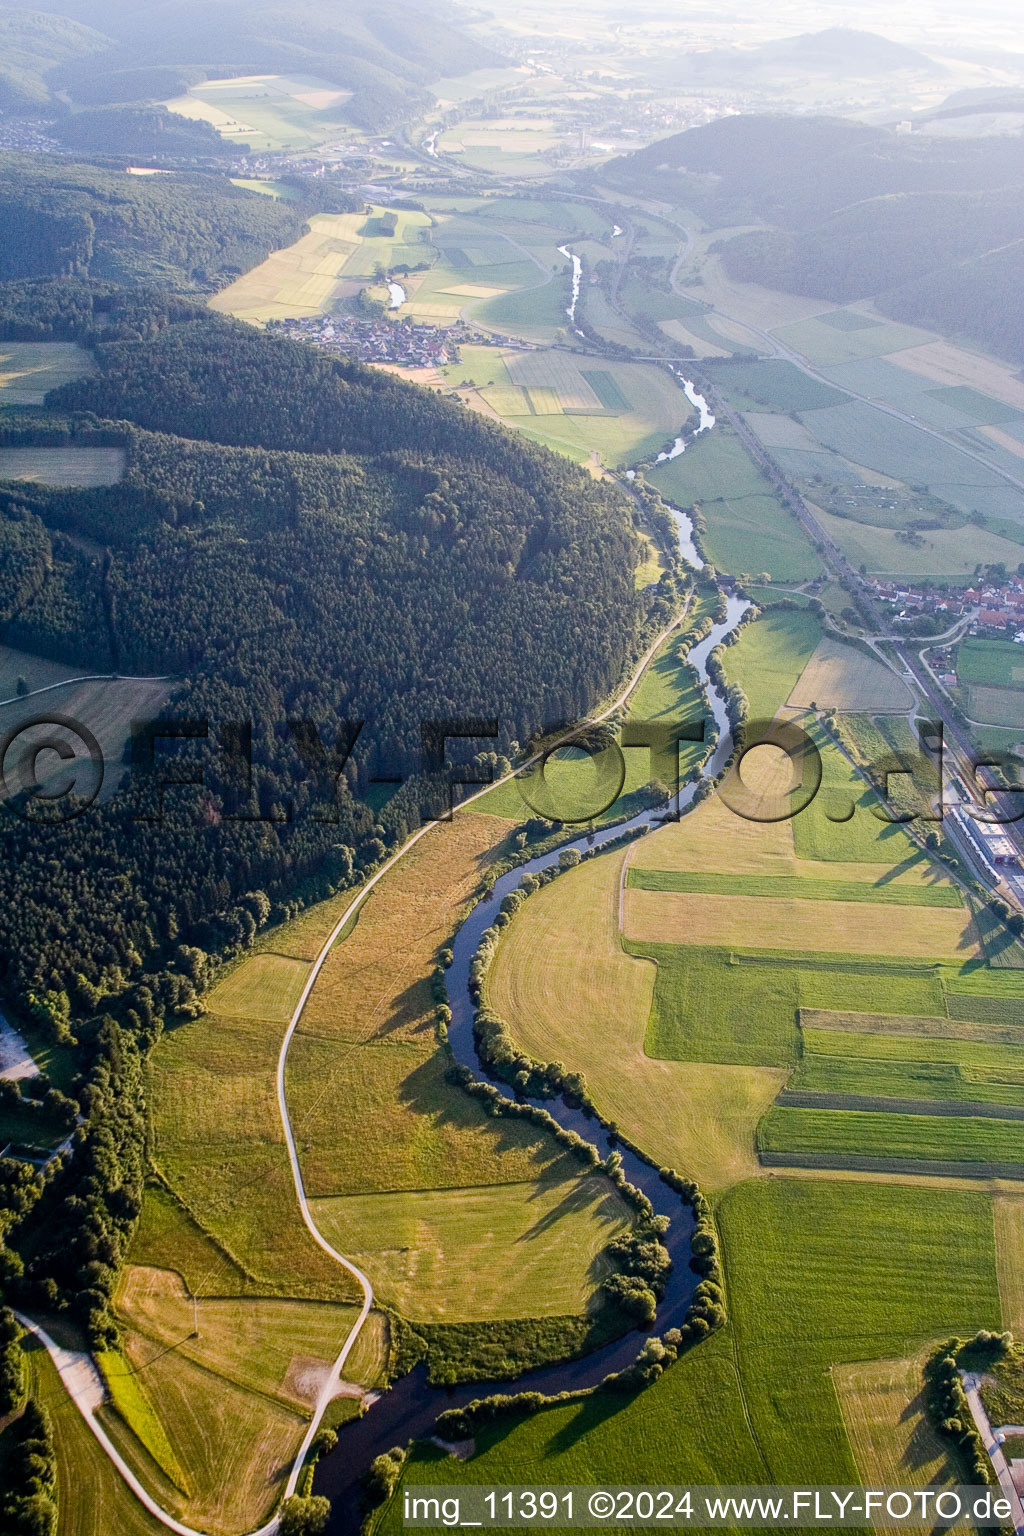 Curved loop of the riparian zones on the course of the river of the river Danube in Immendingen in the state Baden-Wurttemberg